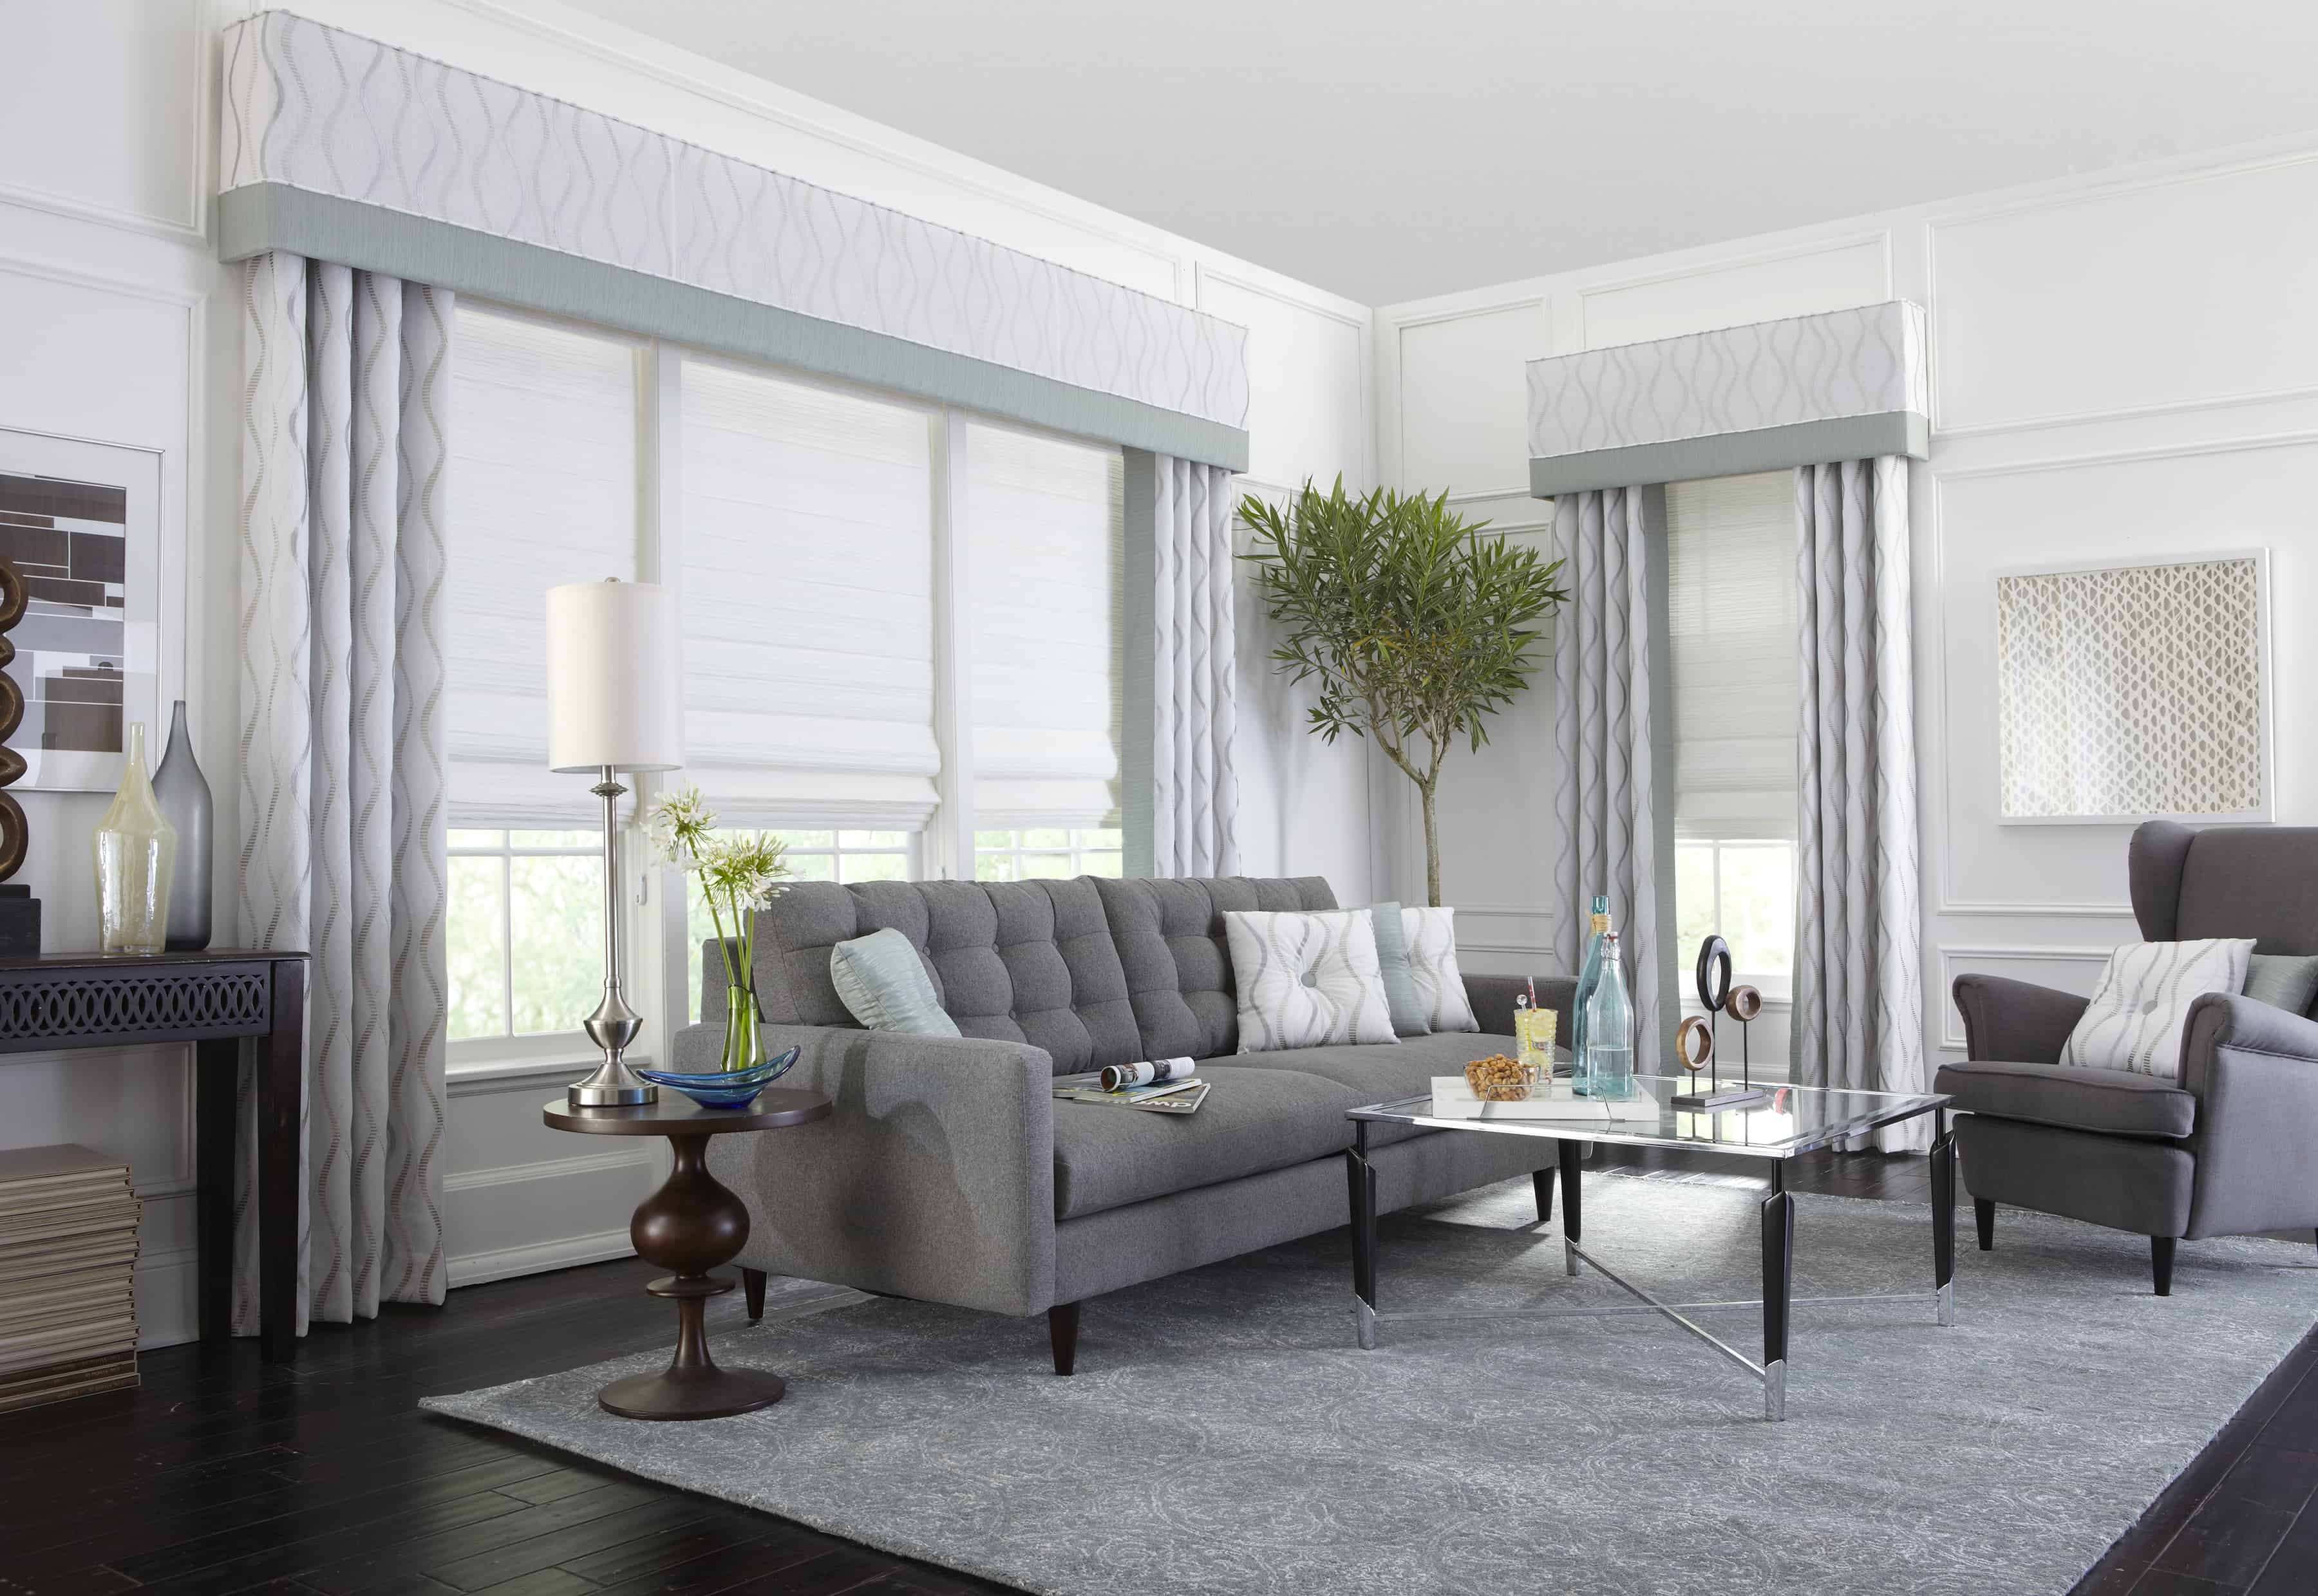 gray sofa and draperies in living room